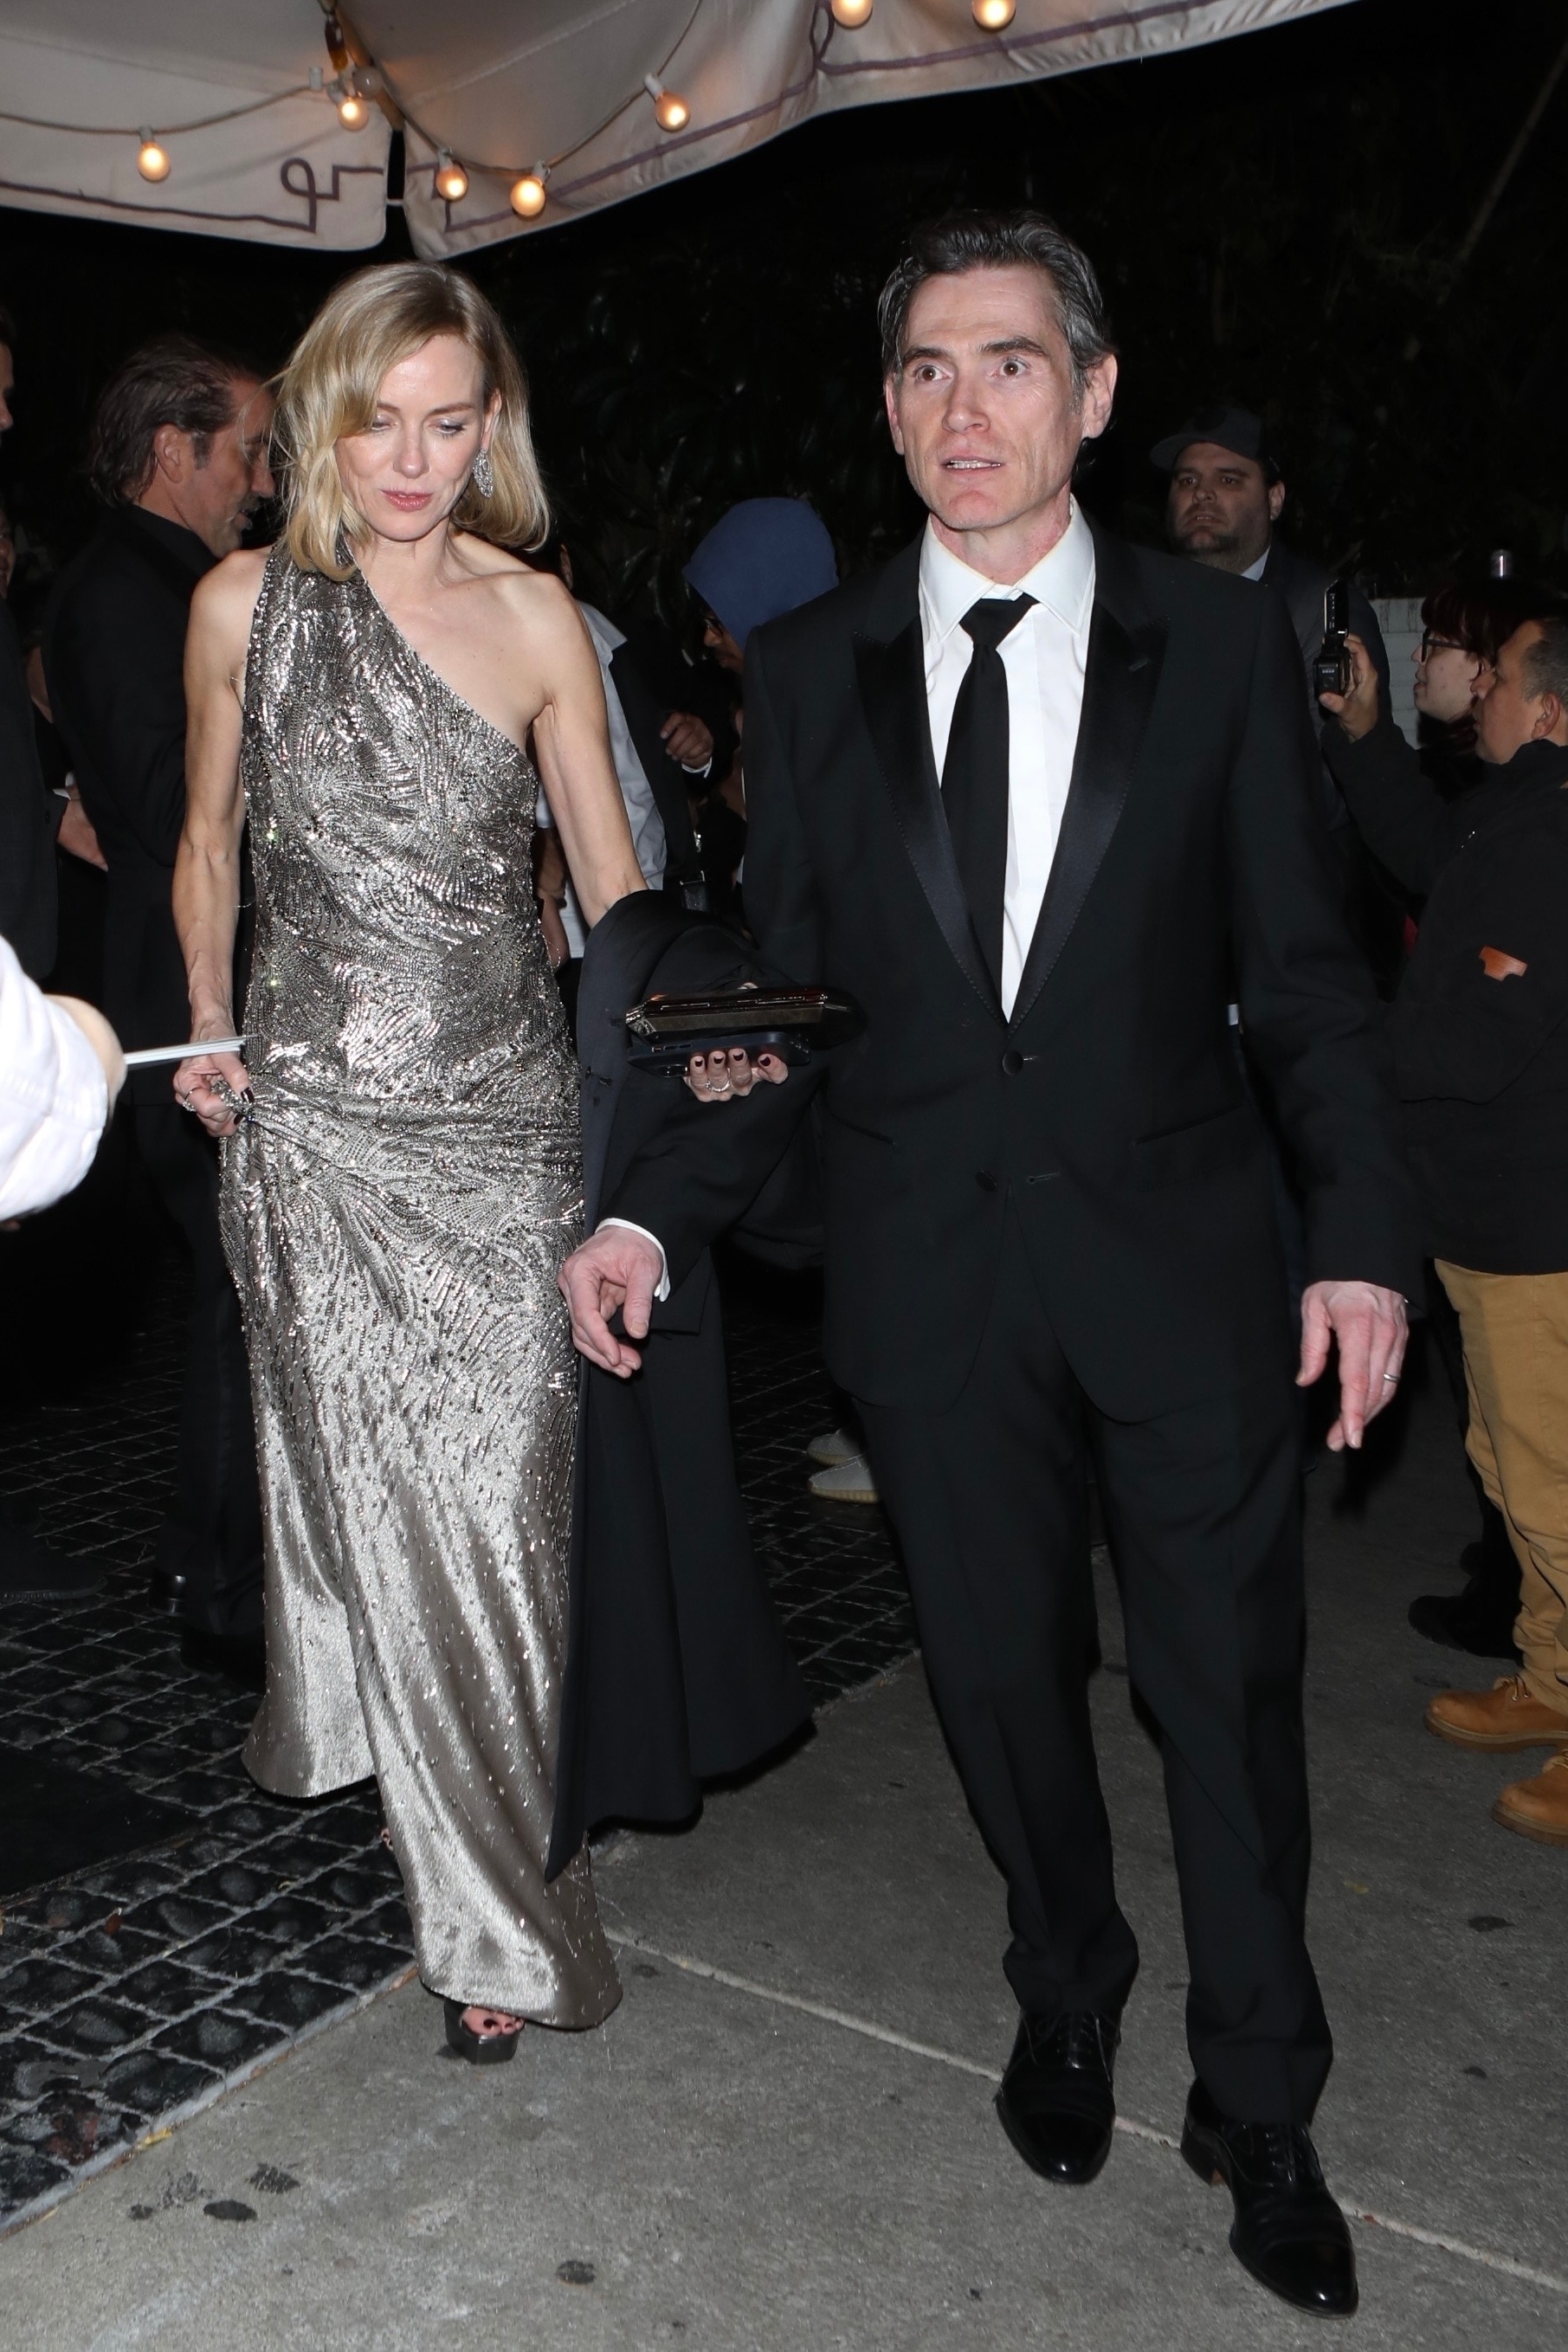 Naomi Watts left the party during the early hours